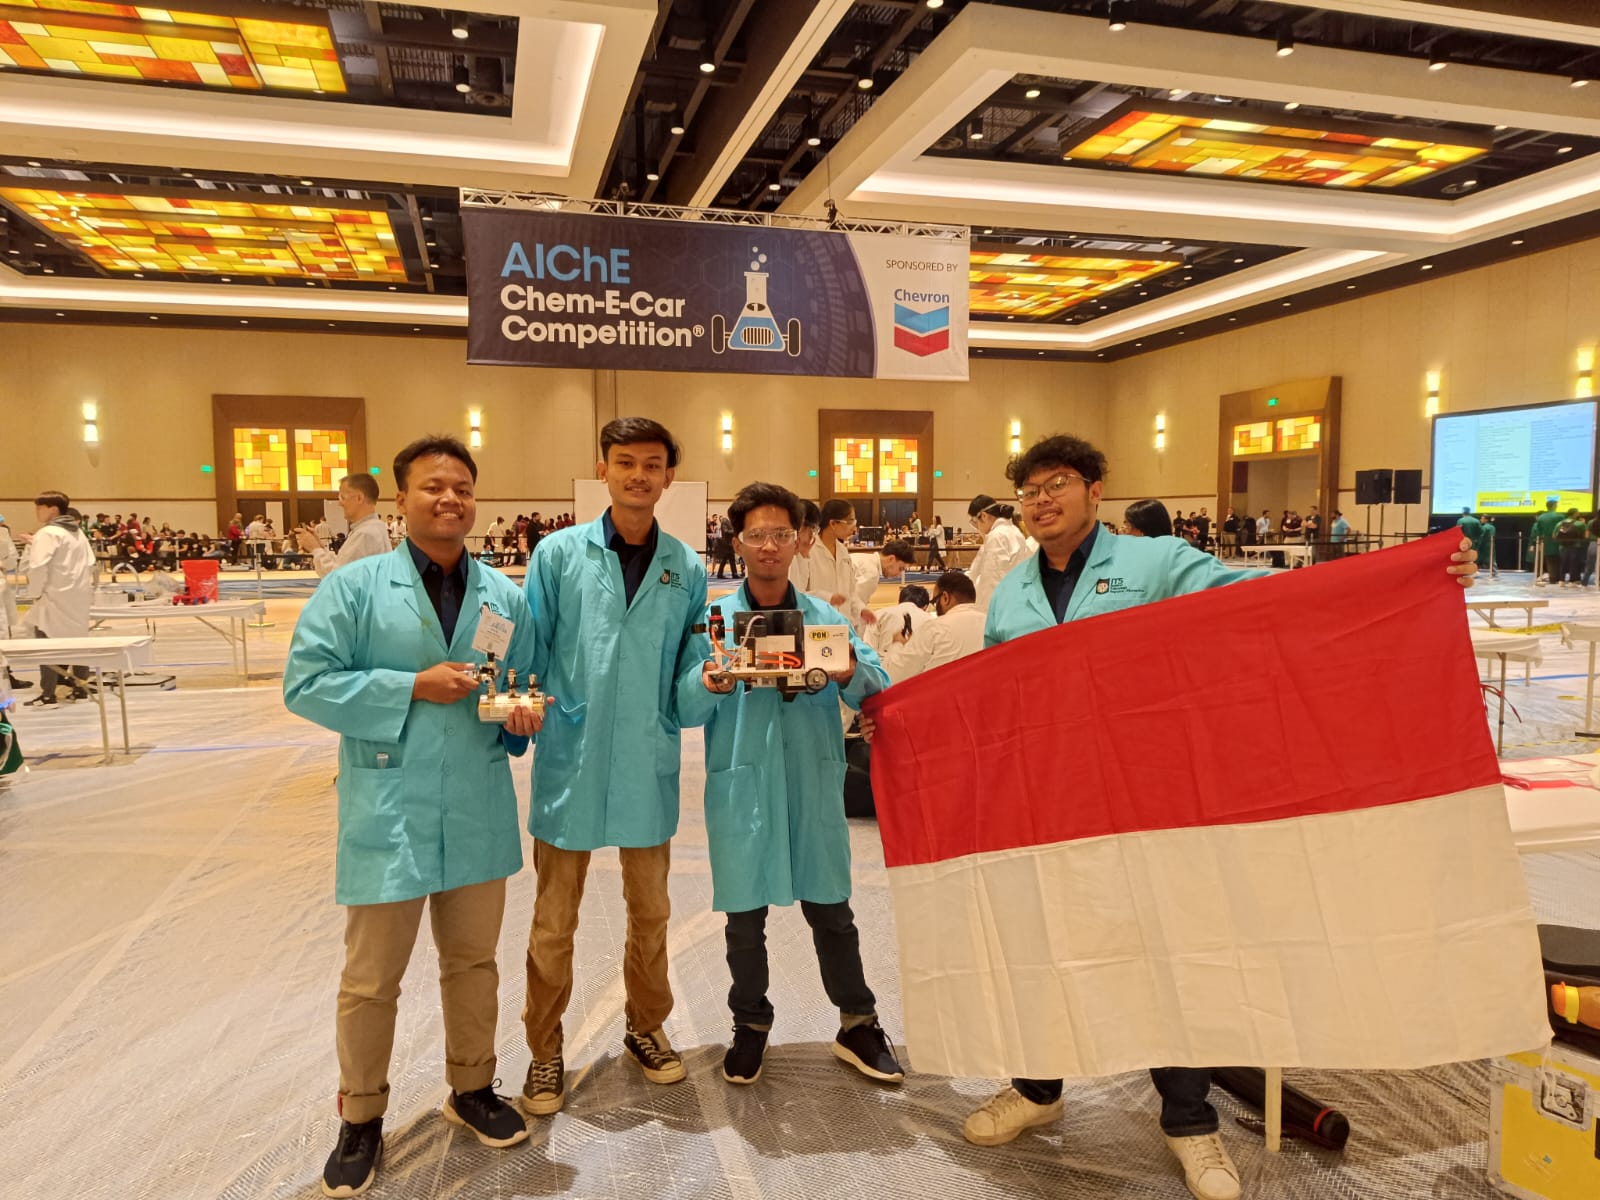 ITS Spectronics team is Indonesia's only representative with Spectronics 23 car in the Chem E-car competition held by AIChE in Florida, USA.